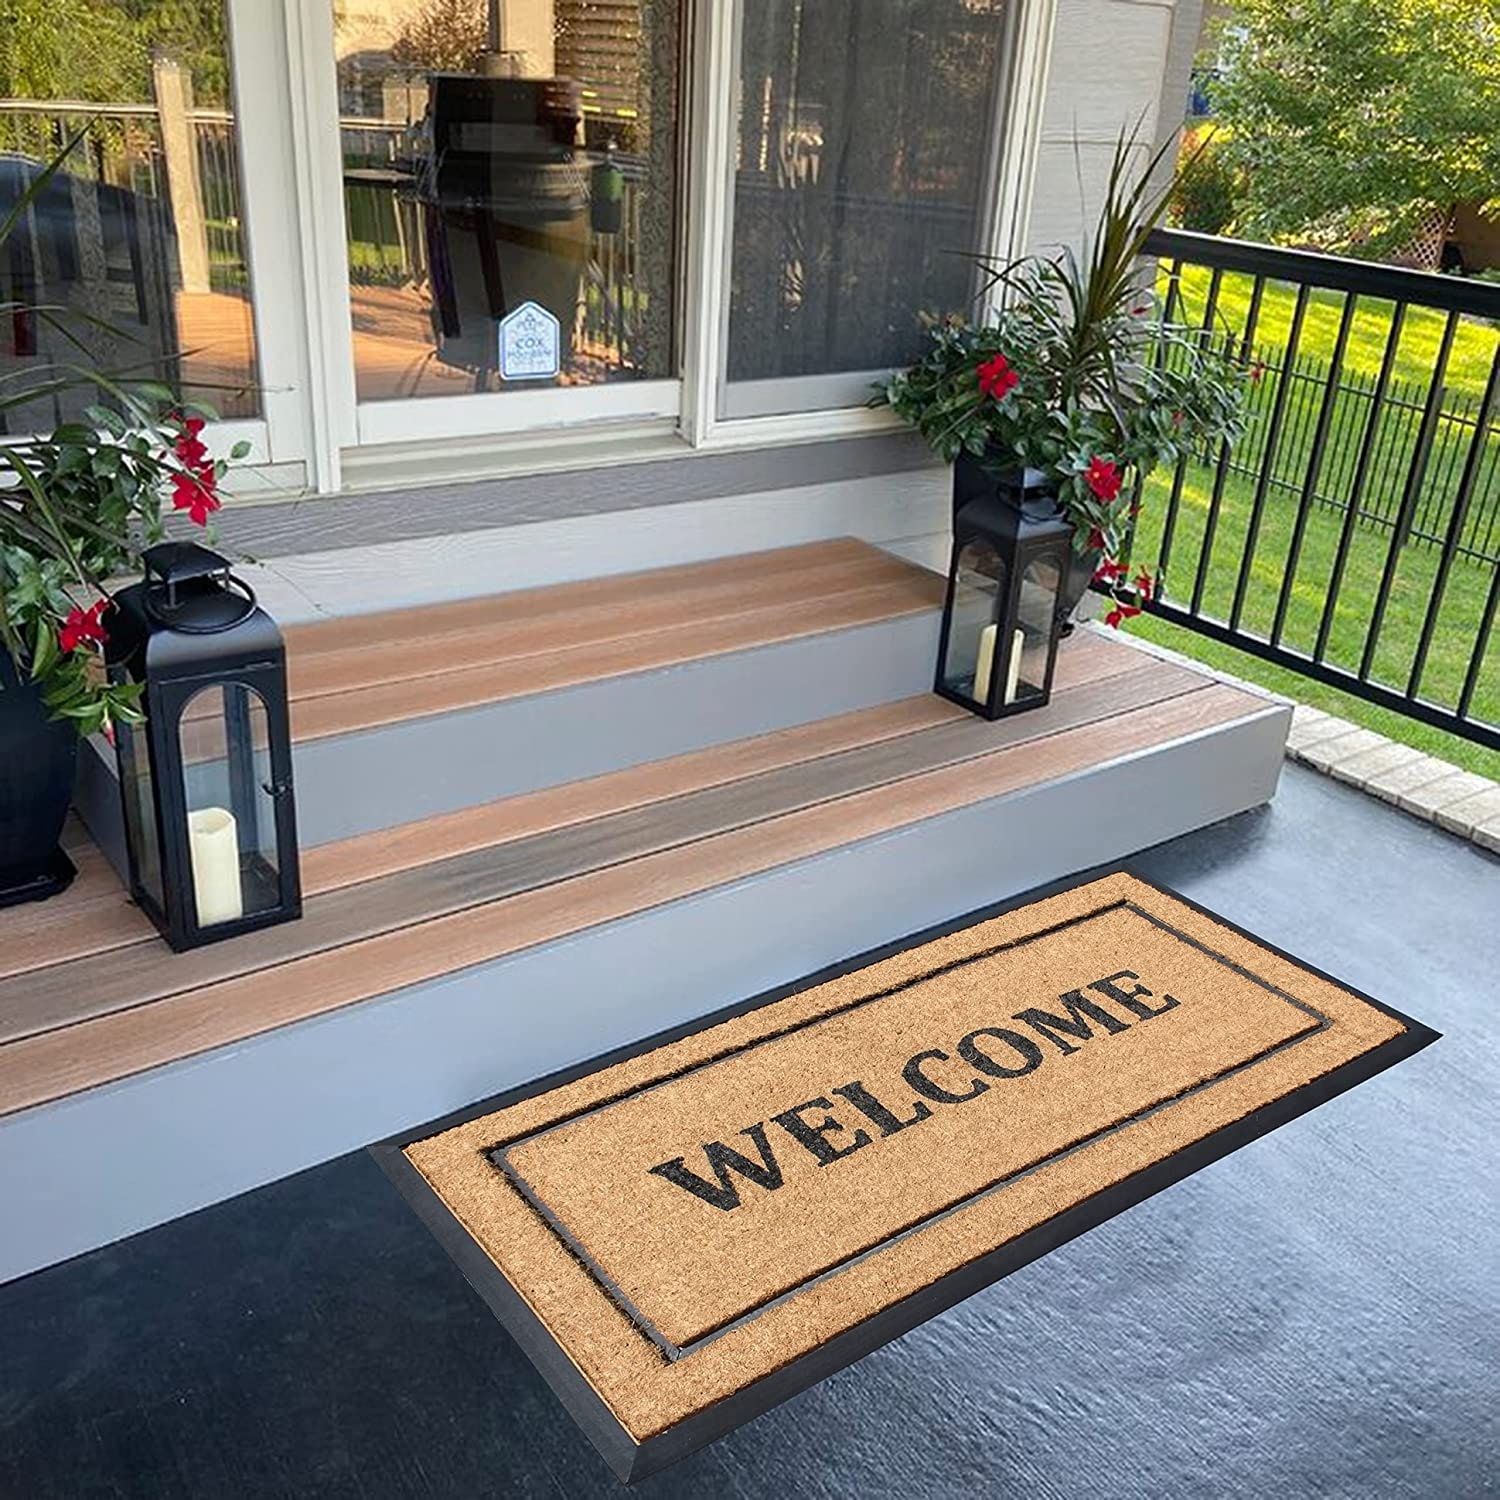 https://ak1.ostkcdn.com/images/products/is/images/direct/8592c889f466ea22bdd9b2b88e4f6cb159010d45/A1HC-Entrance-Door-Mats%2C-24%22-x-48%22%2C-Durable-Large-Outdoor-Rug%2C-Rubber-Backed-Low-Profile-Heavy-Non-Slip-Welcome-Doormat.jpg